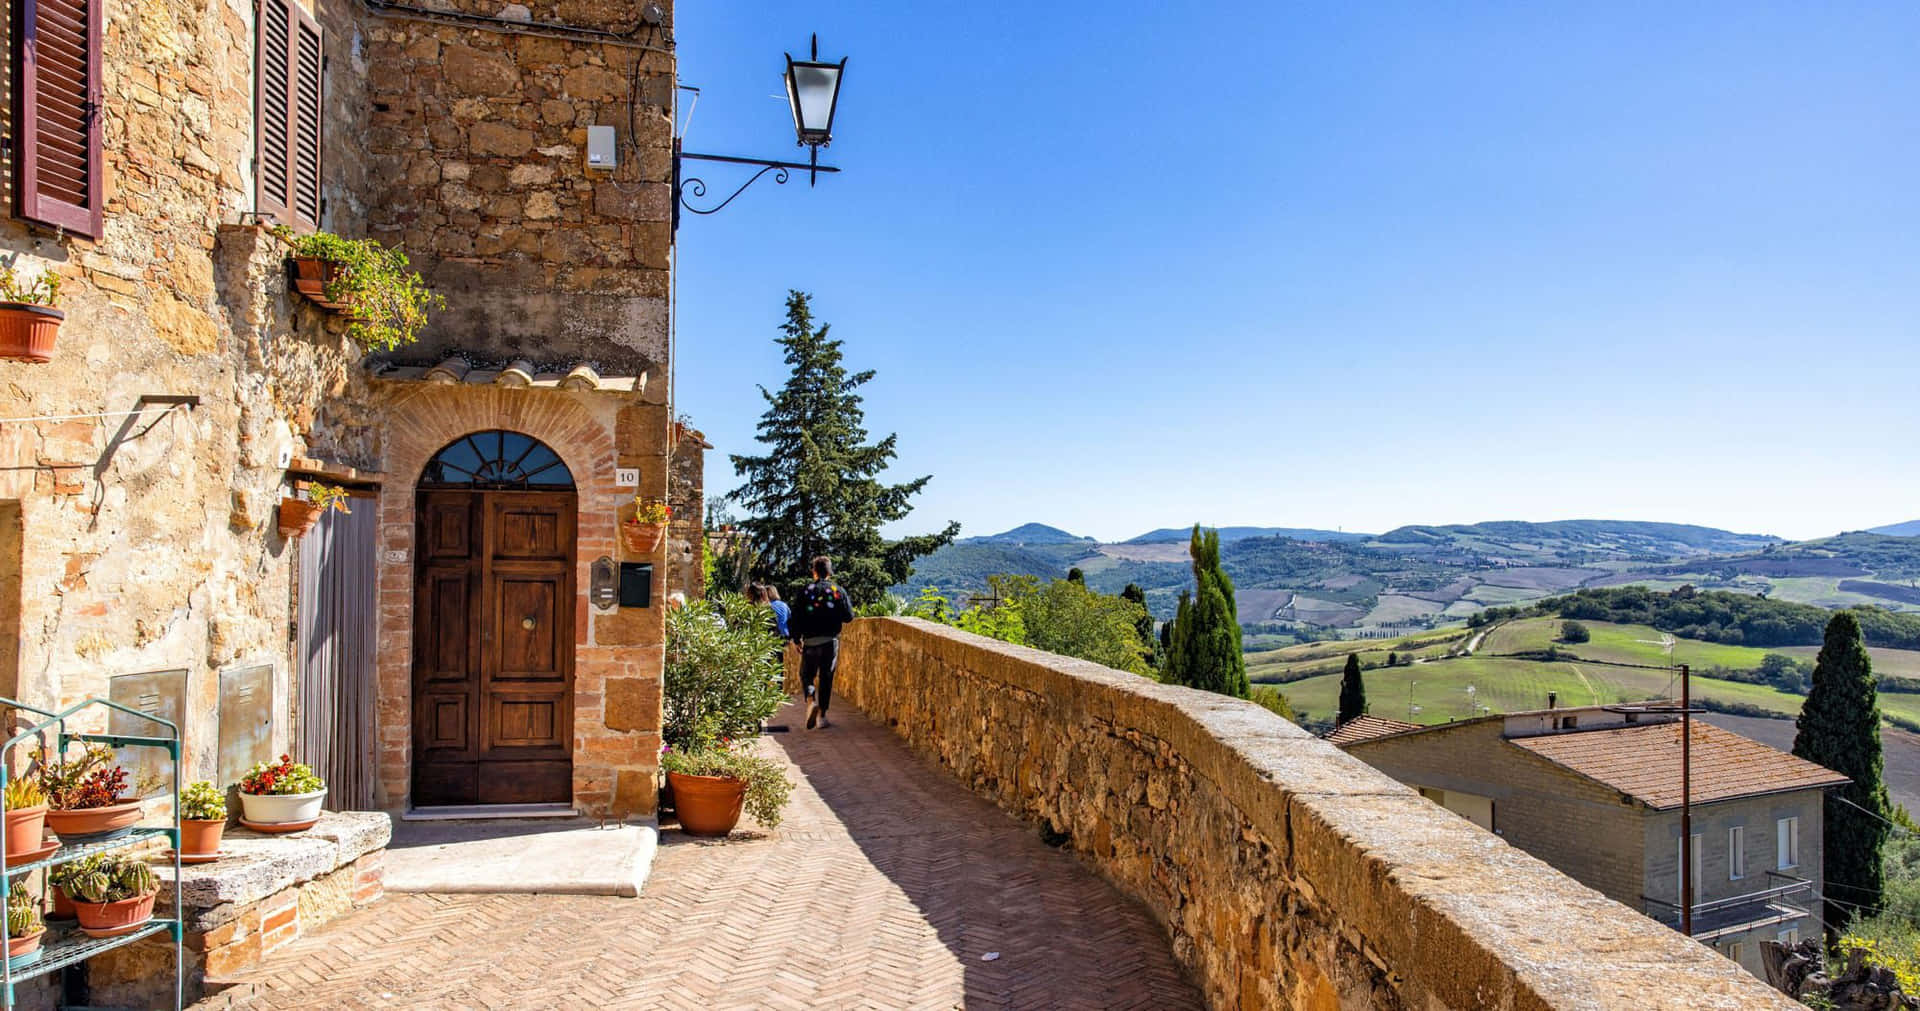 Old Pienza Brick House With Mountain Scenery Wallpaper